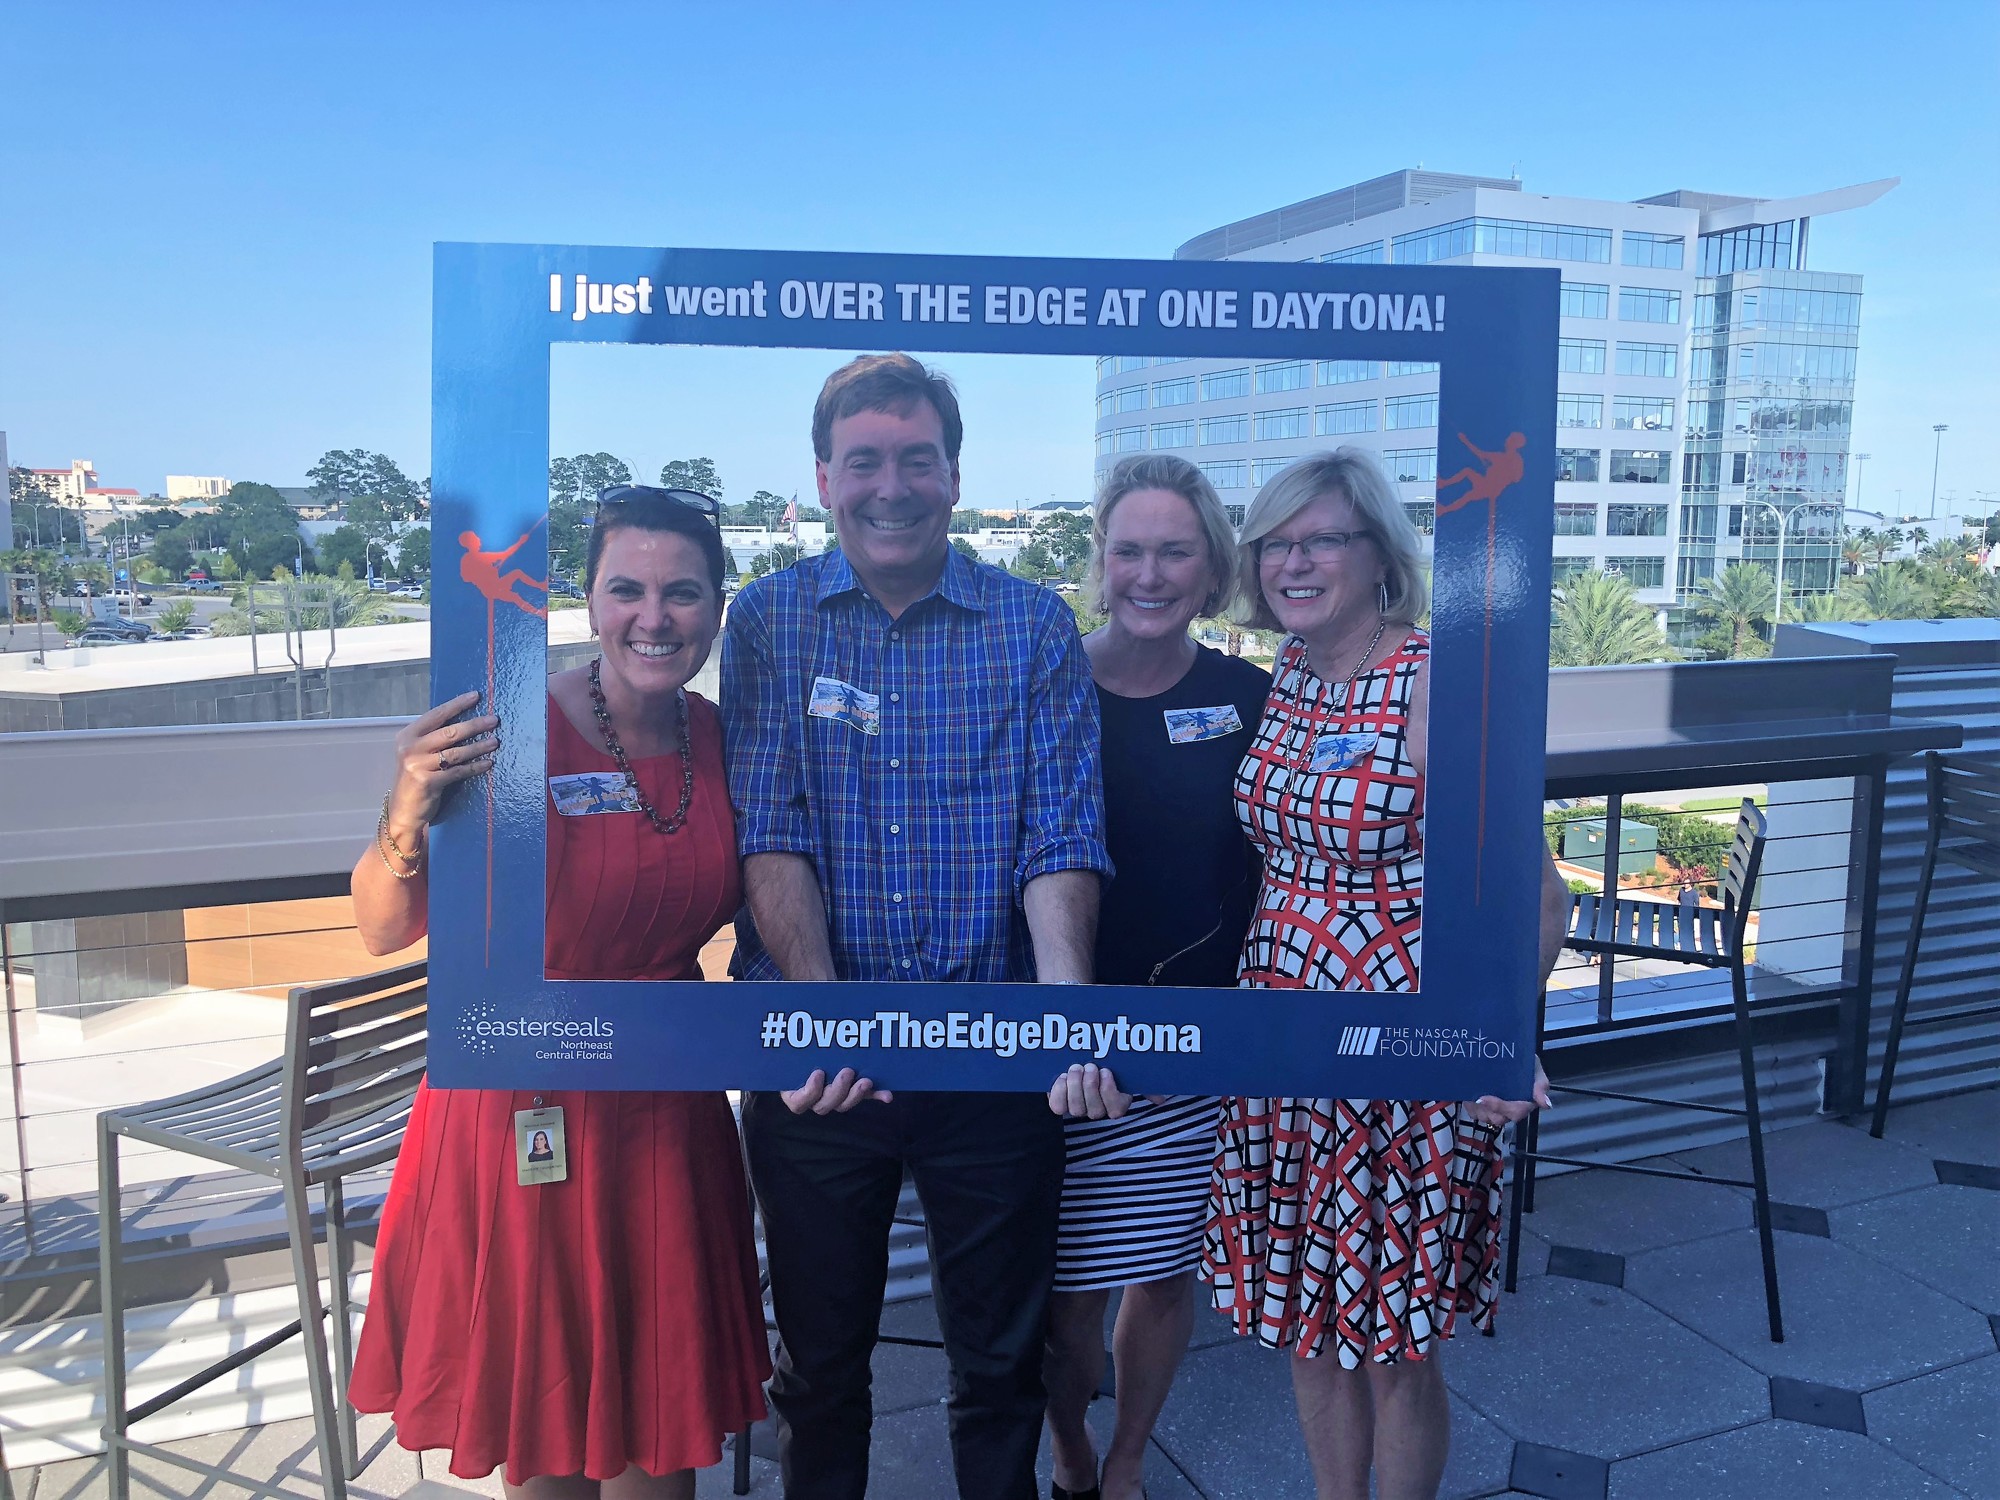 Announcing the return of Over the Edge are NASCAR Foundation Director Nichole Krieger; NASCAR General Counsel Gary Crotty; CEO of International Speedway Corporation Lesa France Kennedy; and Easterseals representative Sheryl Cook. Courtesy photo